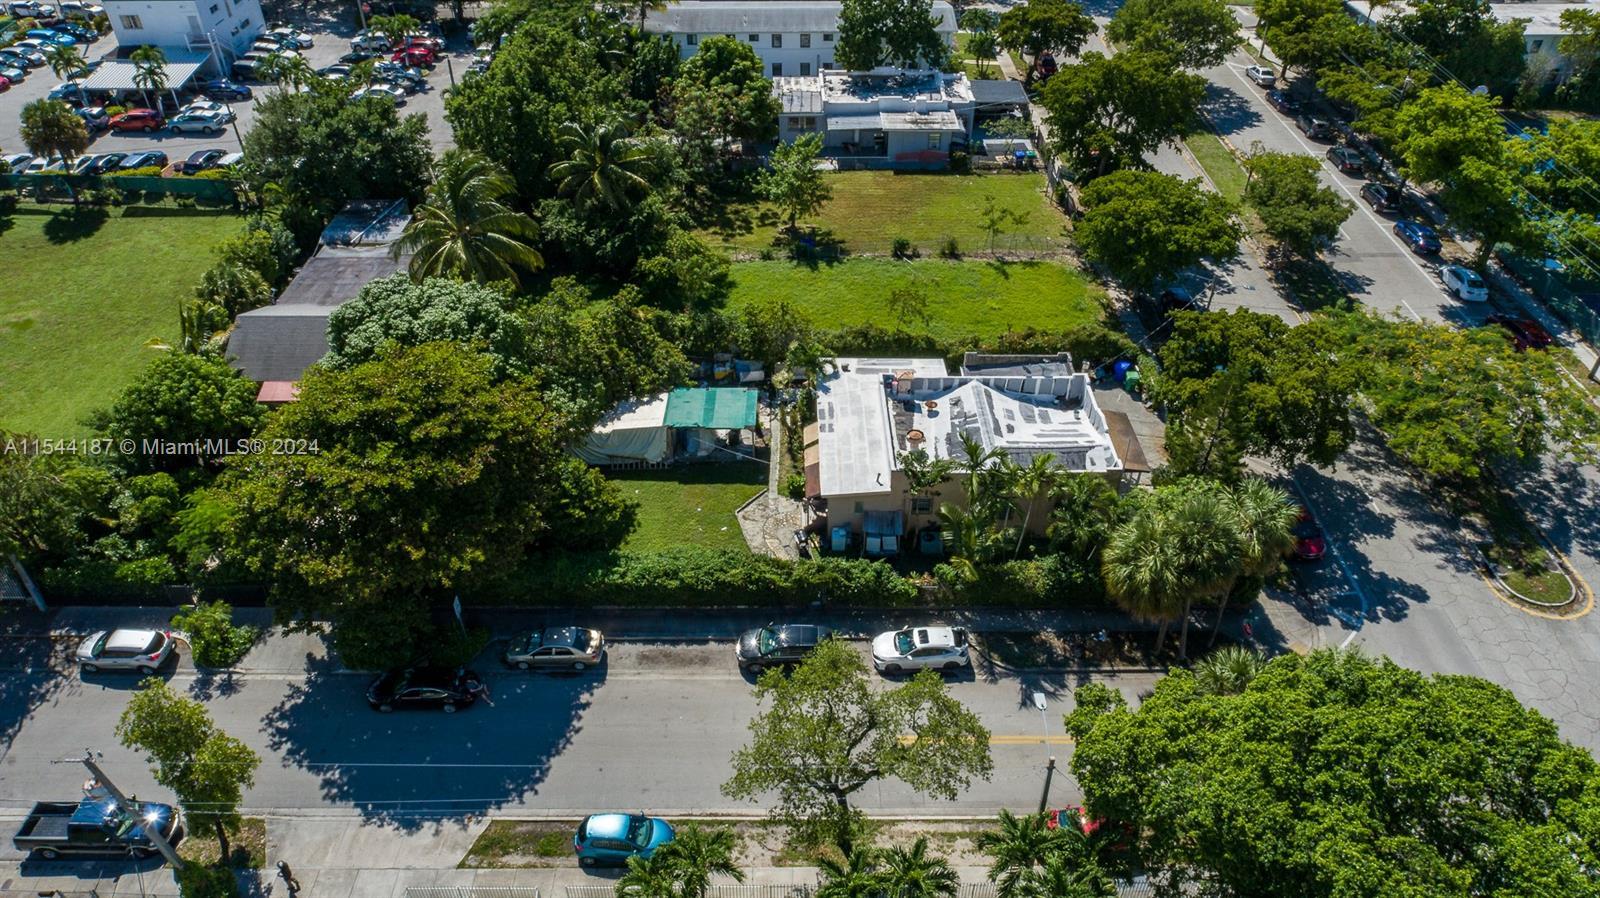 Photo of 3055 NW 5th Ave in Miami, FL